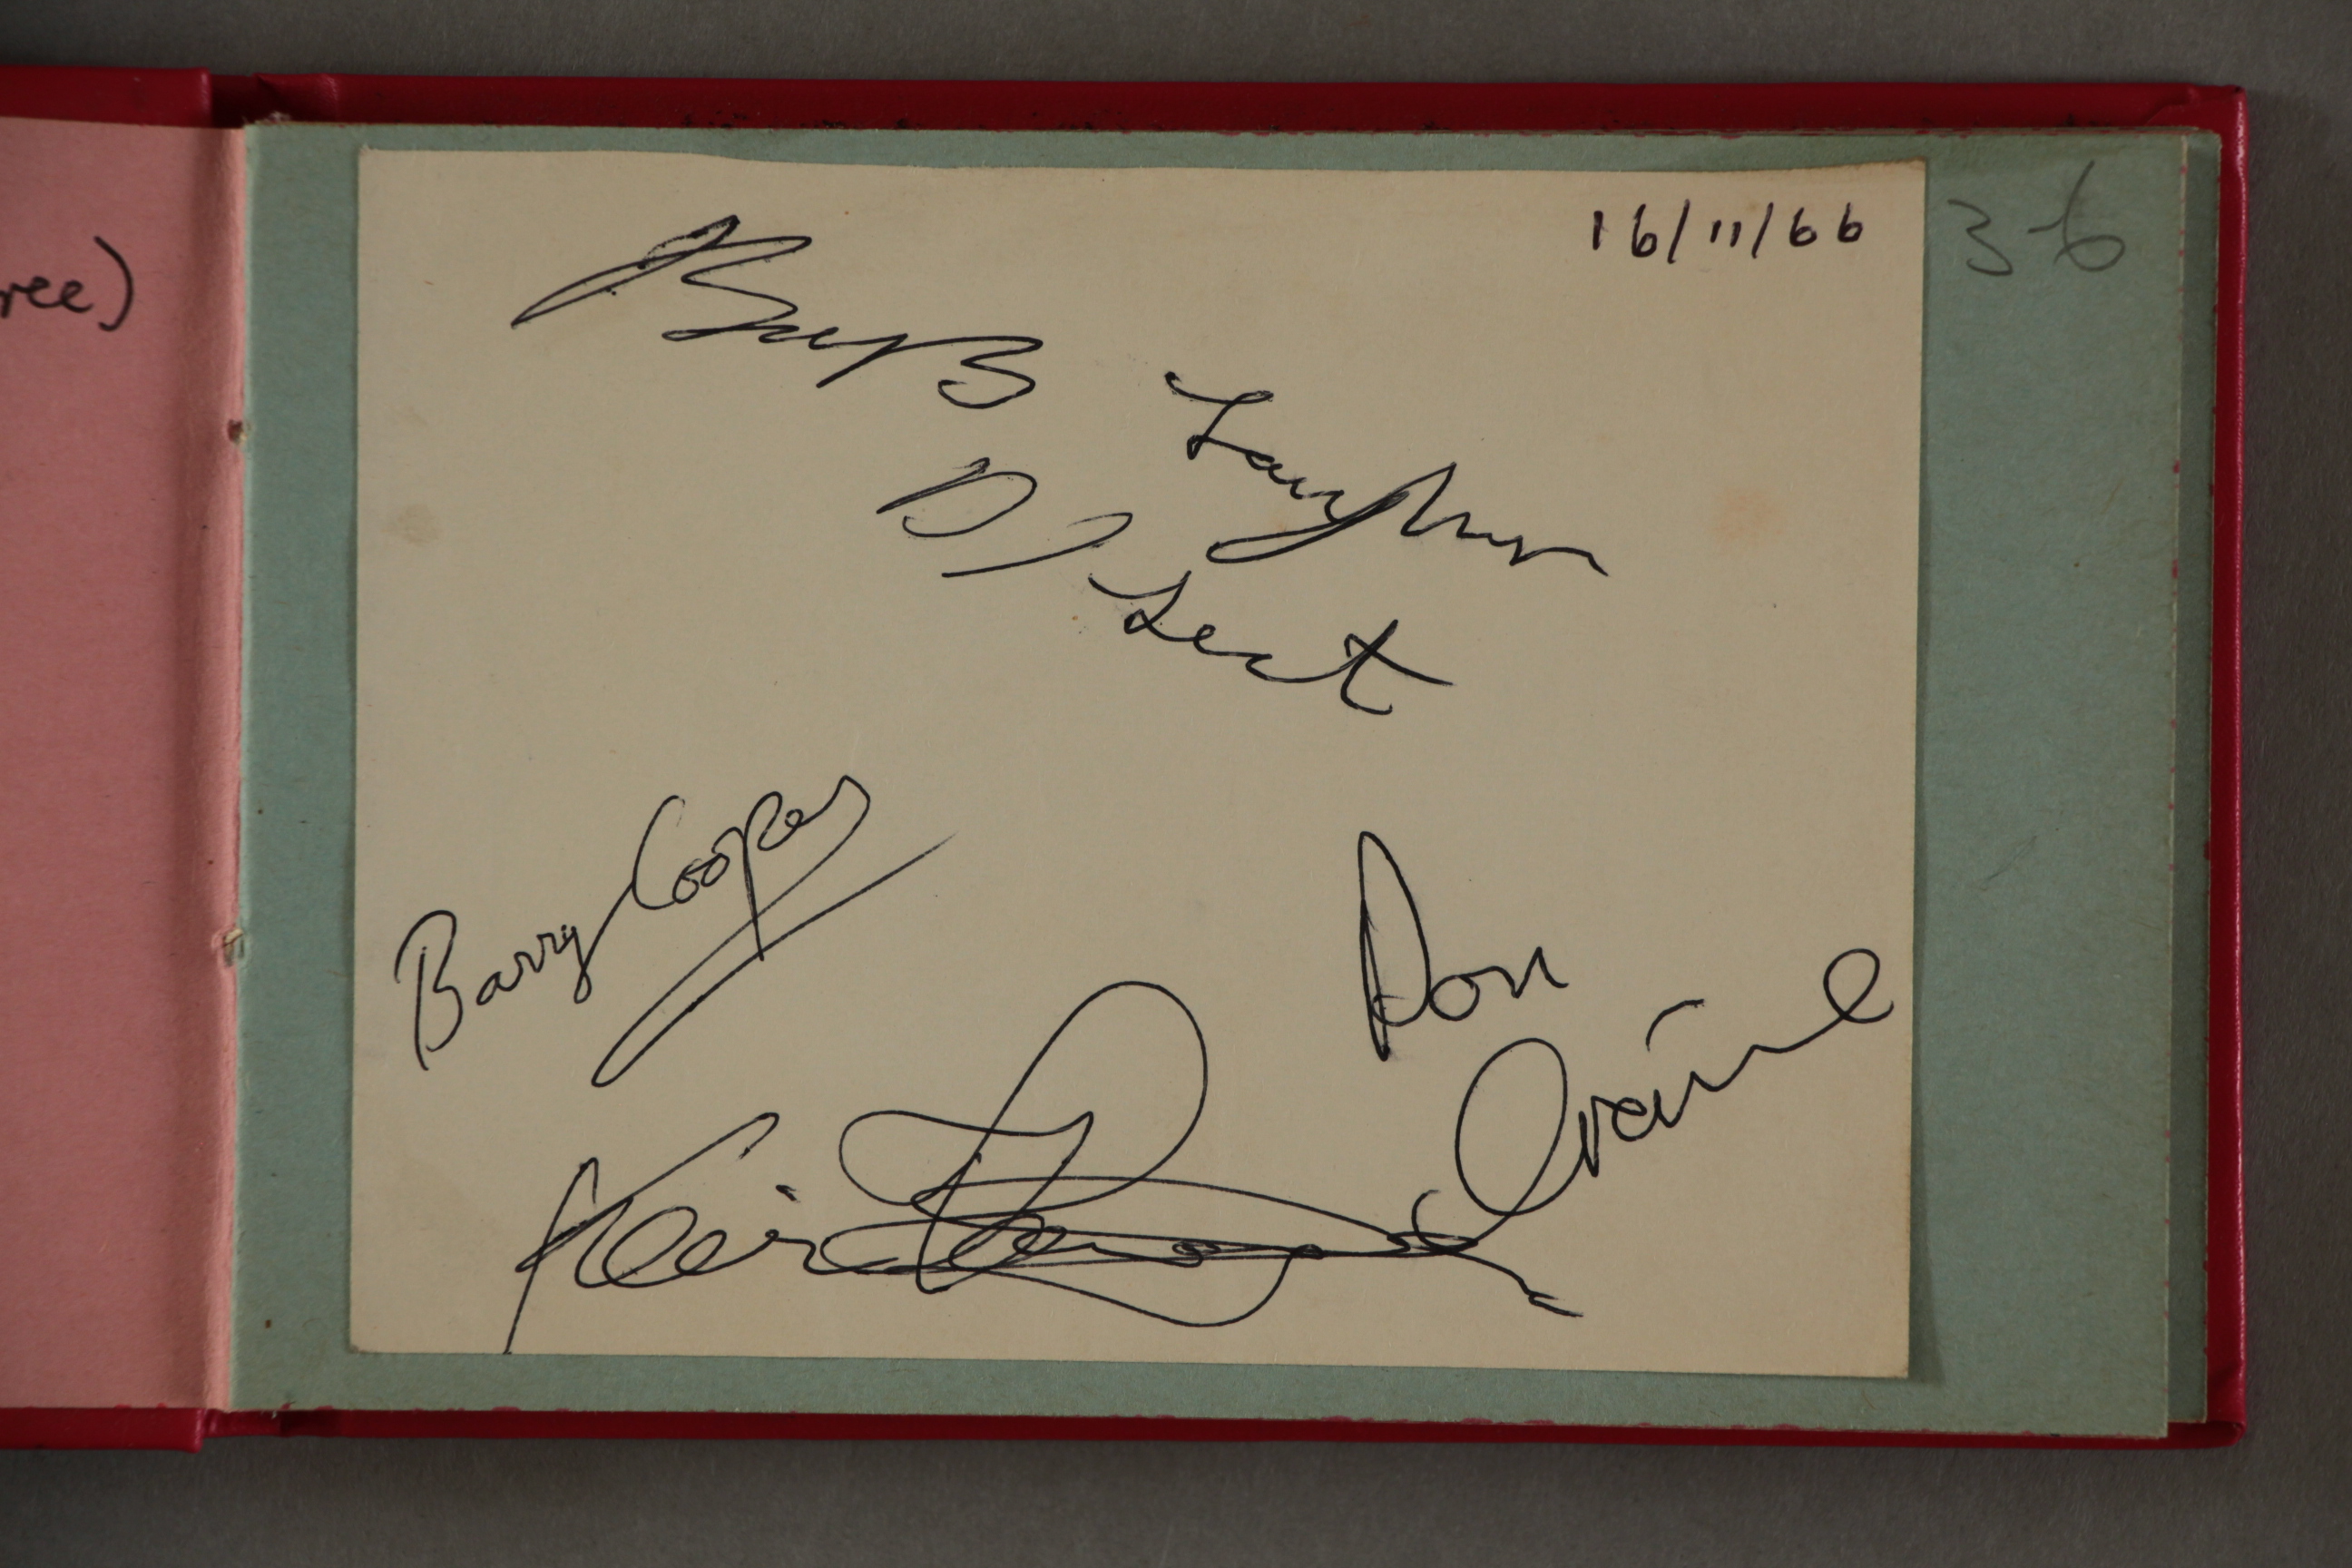 Autograph book of pop groups that performed at Stourbridge Town Hall from 16th November 1966 to 5th - Image 2 of 10